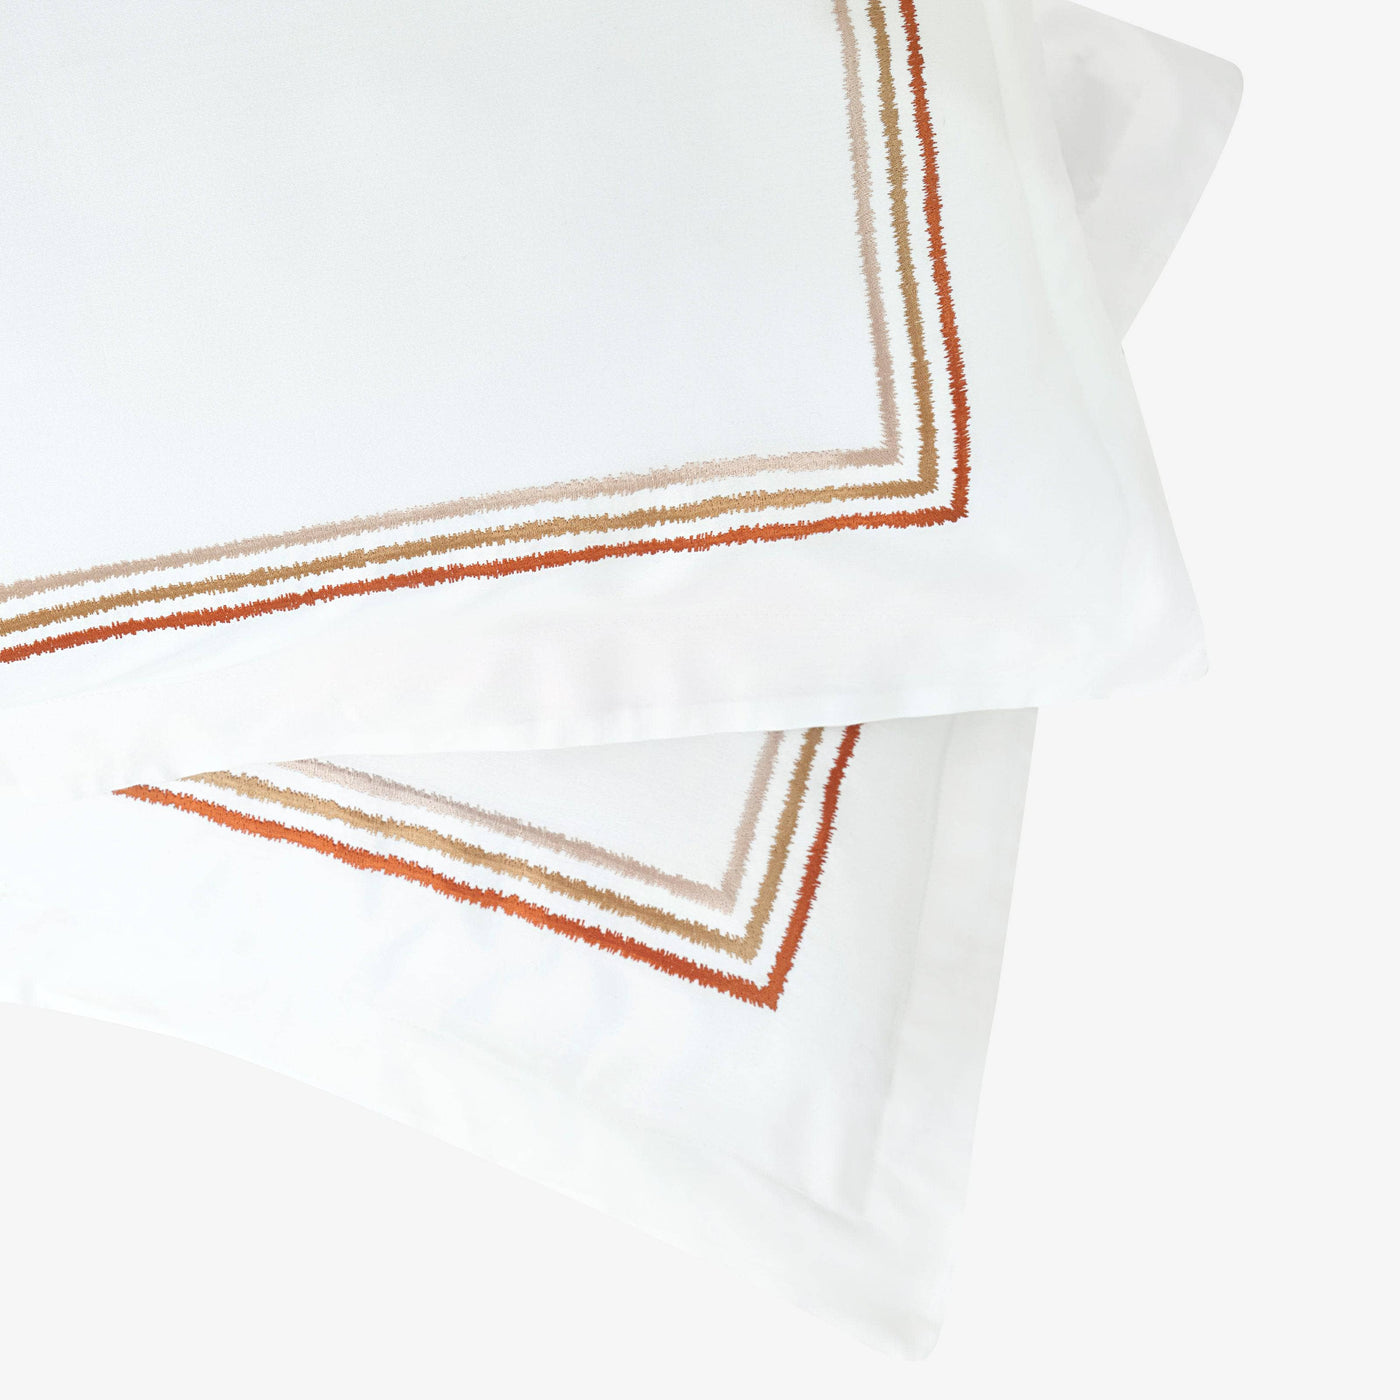 Darcy Embroidered 100% Turkish Cotton 210 TC Duvet Cover Set, White - Mustard, Double Size Bedding Sets sazy.com